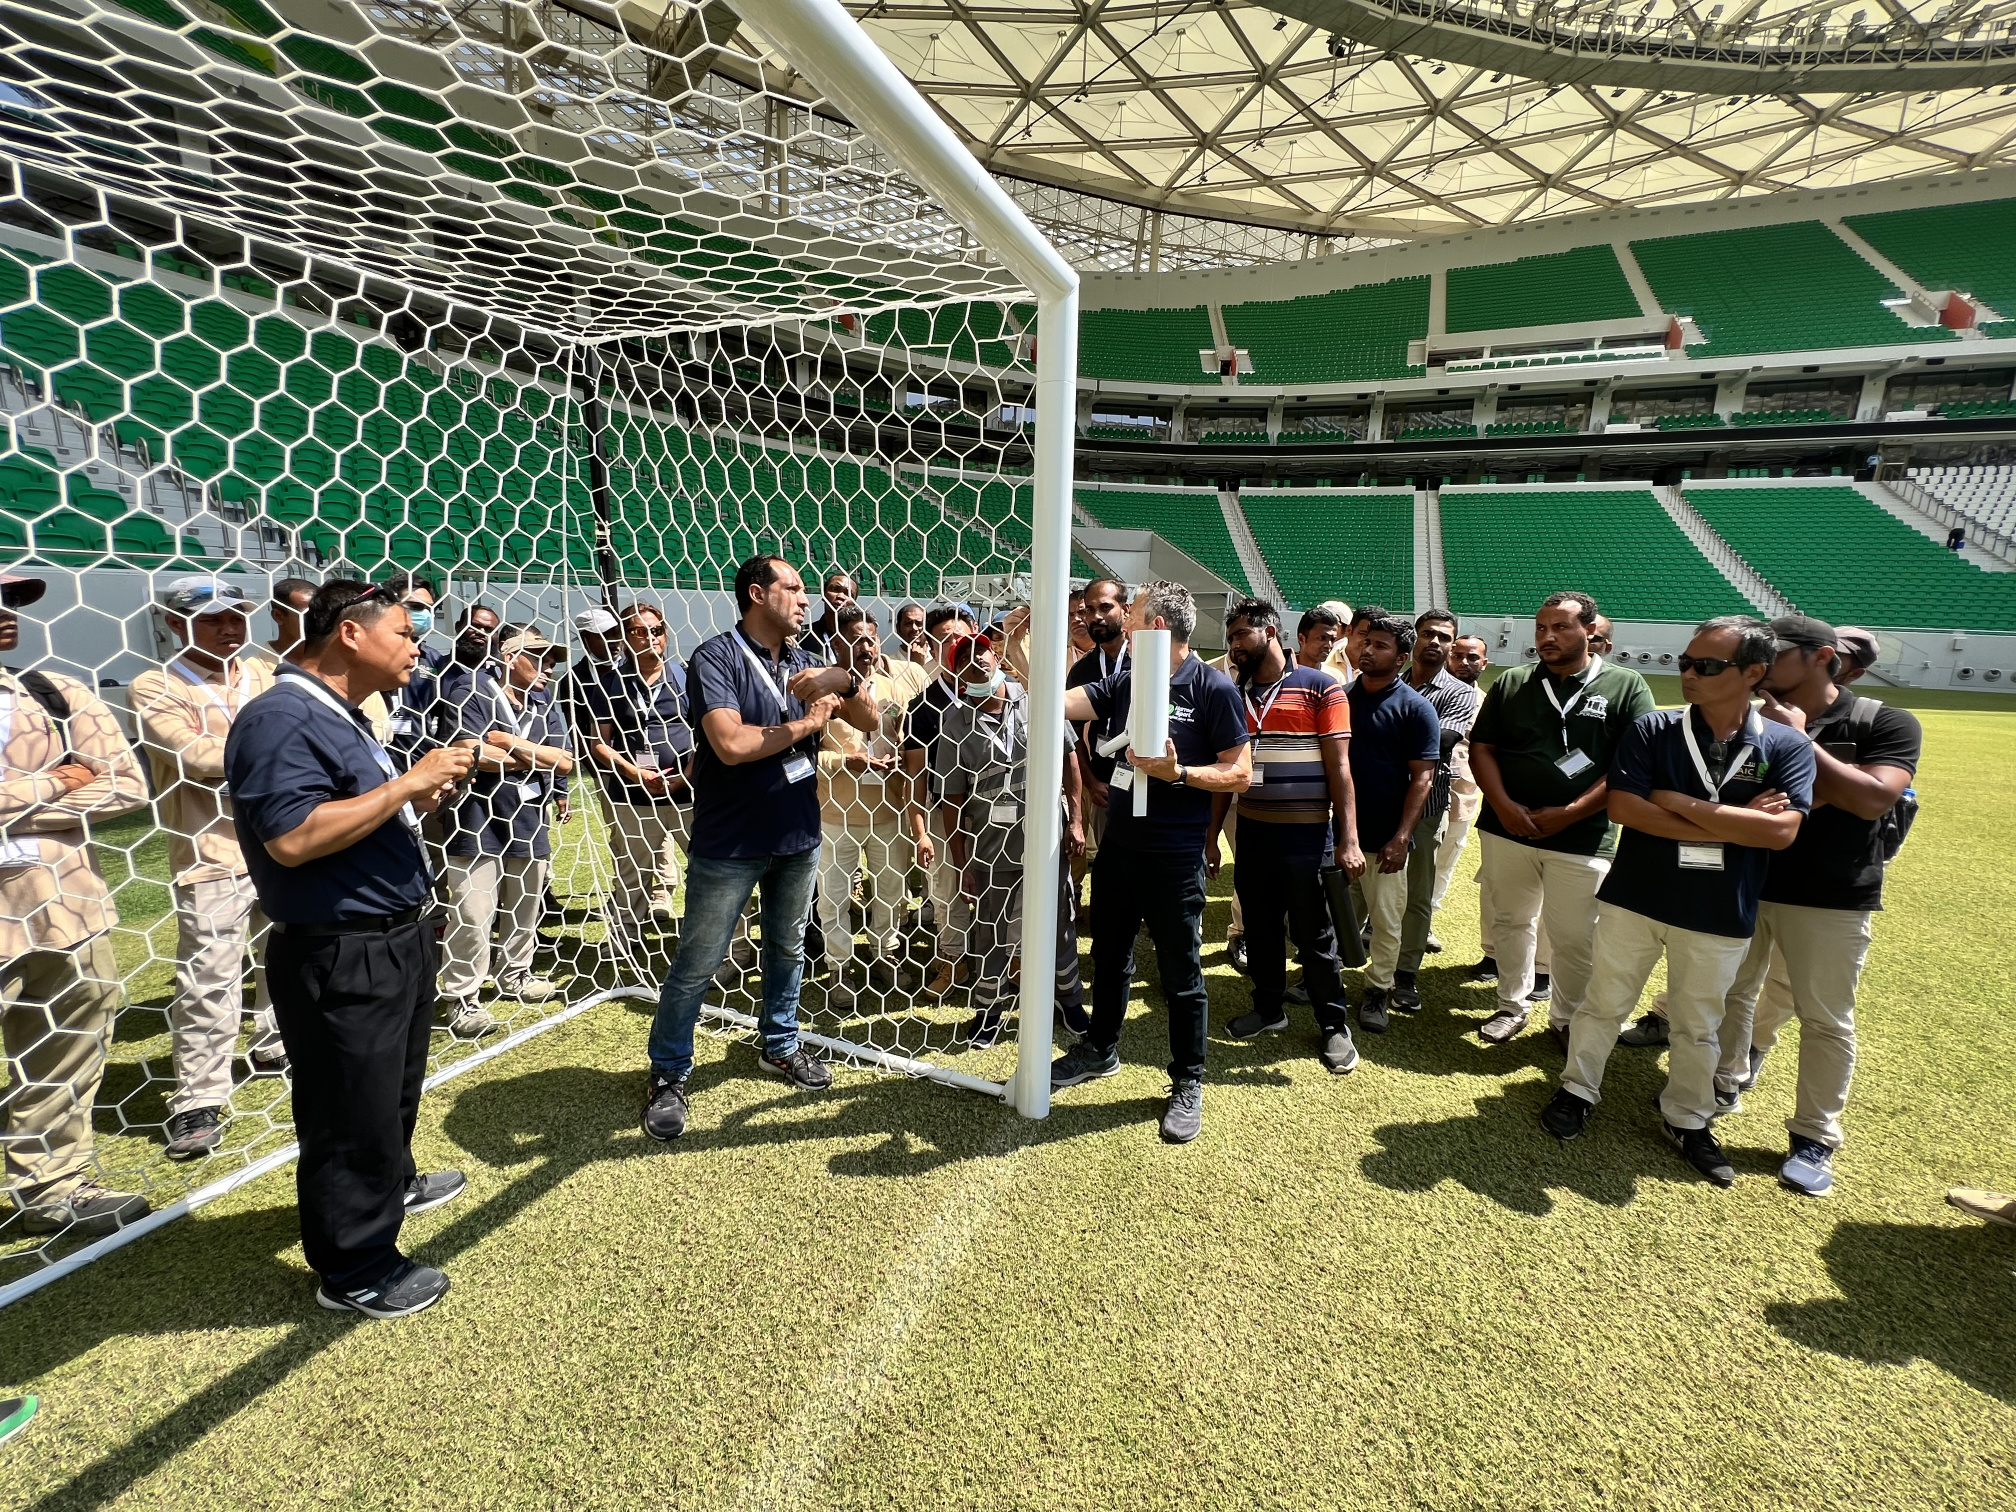 Mark Smith giving a demonstration at the FIFA Workshop in Qatar